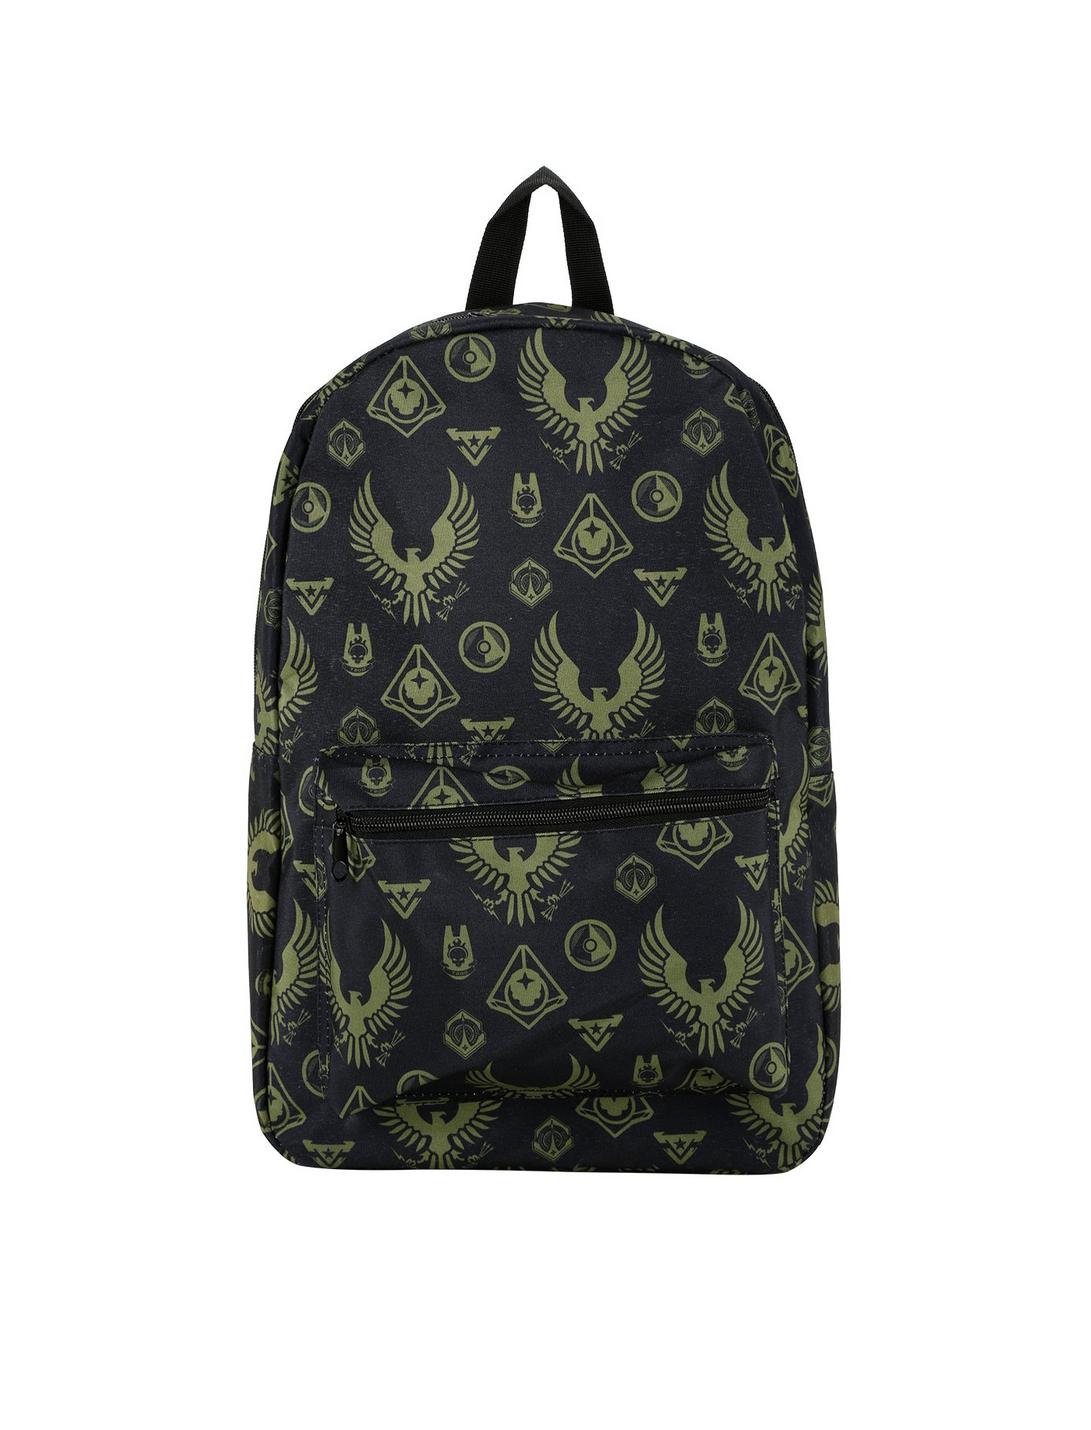 Halo Icons Print Backpack, , hi-res